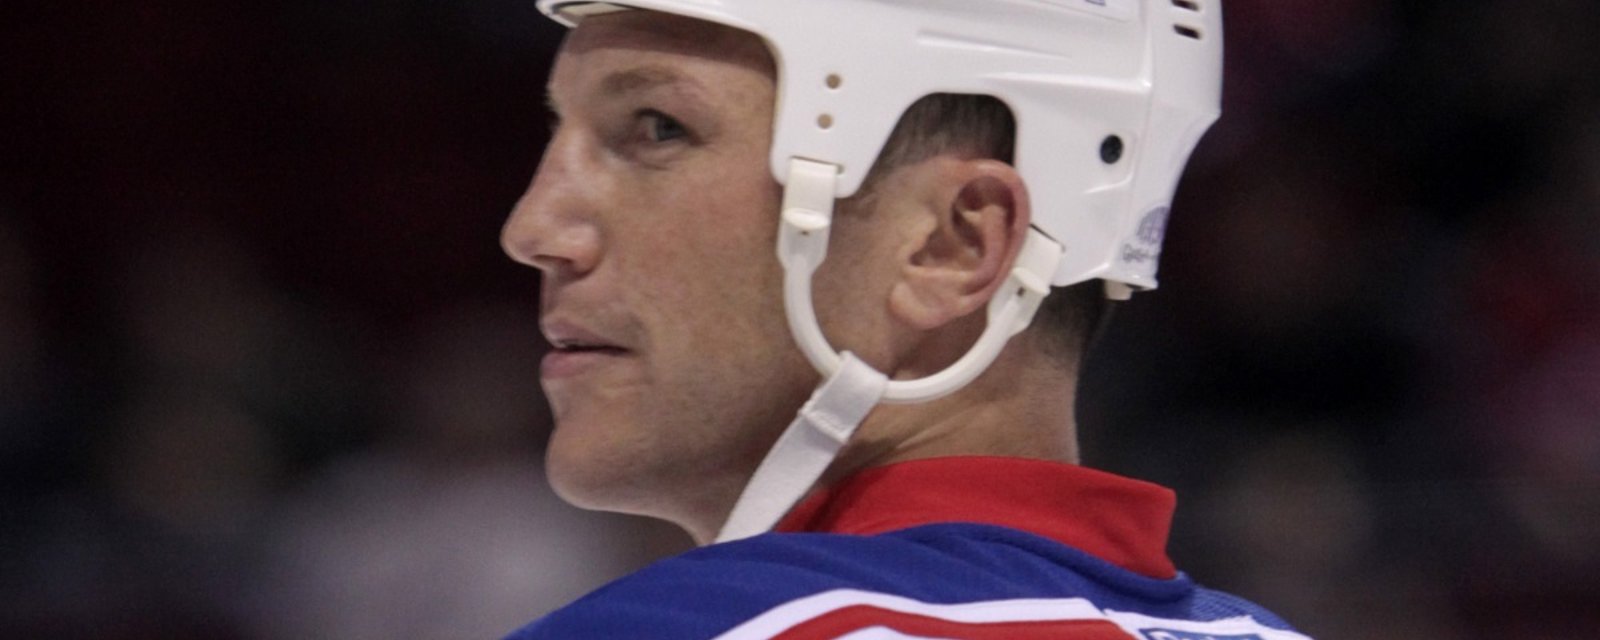 Sean Avery reveals he was also abused by an NHL head coach.